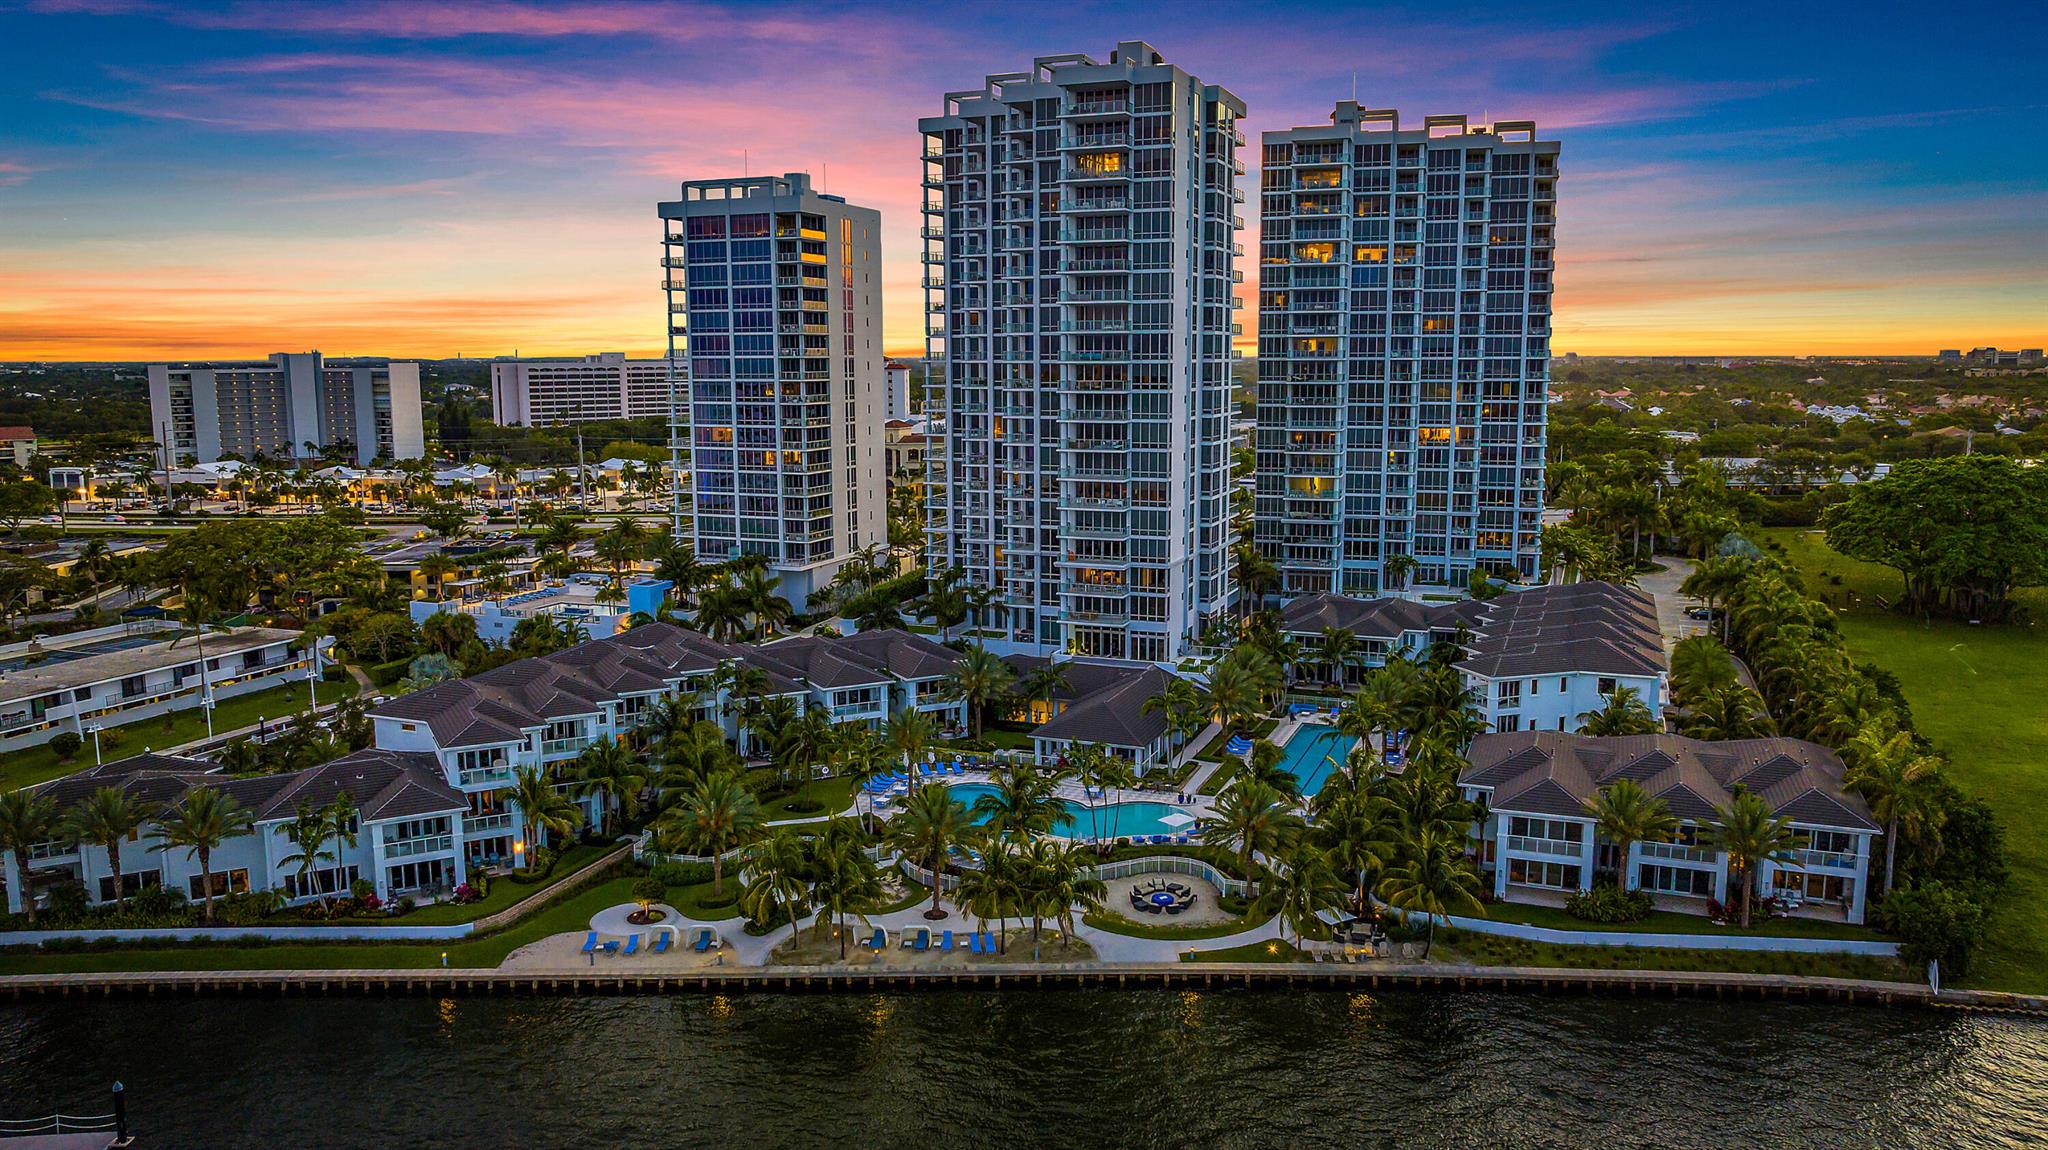 BEAUTIFULLY UPDATED AND DECORATED 9TH FLOOR CORNER RESIDENCE WITH STUNNING PANORAMIC VIEWS OF THE INTRACOASTAL, OCEAN, MARINAS AND CITY LIGHTS. ELEVATOR TAKES YOU DIRECTLY TO YOUR PRIVATE FOYER.  WONDERFULLY APPOINTED THROUGHOUT WITH DESIGNER FINISHES WHICH INCLUDE LARGE TILE FLOORS, CUSTOM LIGHTING, WINDOW TREATMENTS. ISLAND KITCHEN, NEW CARPETING. ABSOLUTELY WONDERFUL FINISHES AND COLOR SCHEMES CREATE AN INVITING SPACE WITH THE OPTION OF 3 FULL BEDROOMS OR 2 BEDROOMS WITH AN AMAZING OFFICE SPACE . THE MASTER BEDROOM IS A TRUE RETREAT WITH BEAUTIFUL VIEWS AND AN EXQUISITE MASTER BATHROOM WITH DUAL SINKS, WATER CLOSET, SPA TUB AND SPACIOUS CUSTOM CLOSET WITH BUILTINS. THE KITCHEN IS ACCENTED WITH A LARGE ISLAND WITH SEATING AND DECORATIVE RANGE HOOD. THIS RESIDENCE COMES WITH TWO DESIGNATED UNDERGROUND PARKING SPOTS AND A STORAGE SPACE. THE WATER CLUB DEFINES LUXURY WHICH STARTS AT THE 24/7 MANNED GATE AND DOORMAN. FROM THE GARAGE YOU GO DIRECTLY TO YOUR FRONT DOOR. THE WATER CLUB HAS RAISED THE BAR AS AN AMENITIES RICH COMPLEX WITH 3 POOLS WITH ONE DESIGNATE FOR LAPS, PICKLEBALL, FITNESS STUDIO, SOCIAL ROOM WITH BILLIARDS, MARINA, BEACH AREA WITH FIRE PIT AND A DOG PARK. A TRUE MUST SEE WATERFRONT COMMUNITY AND LUXURY RESIDENCE.